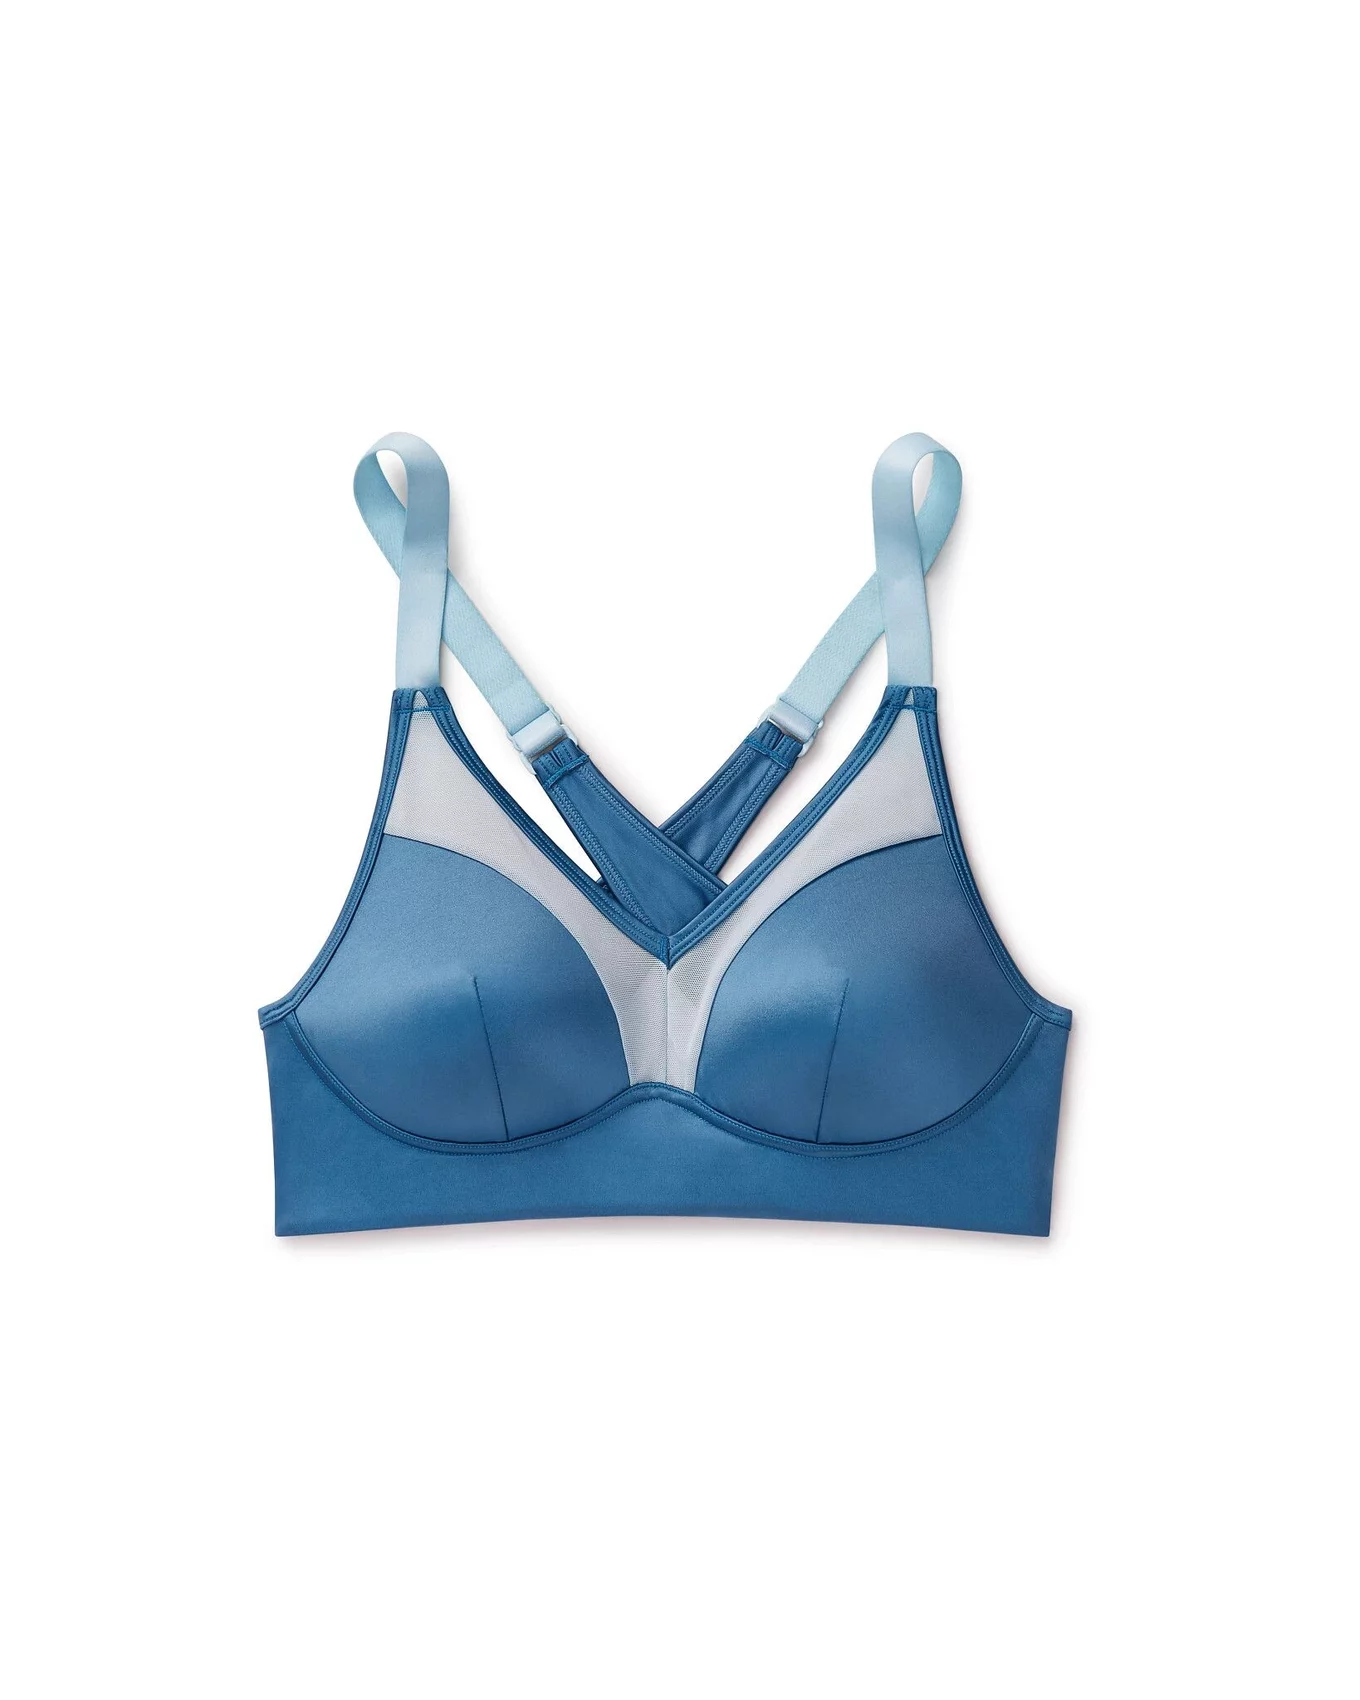 Active Shaping Sports Bra